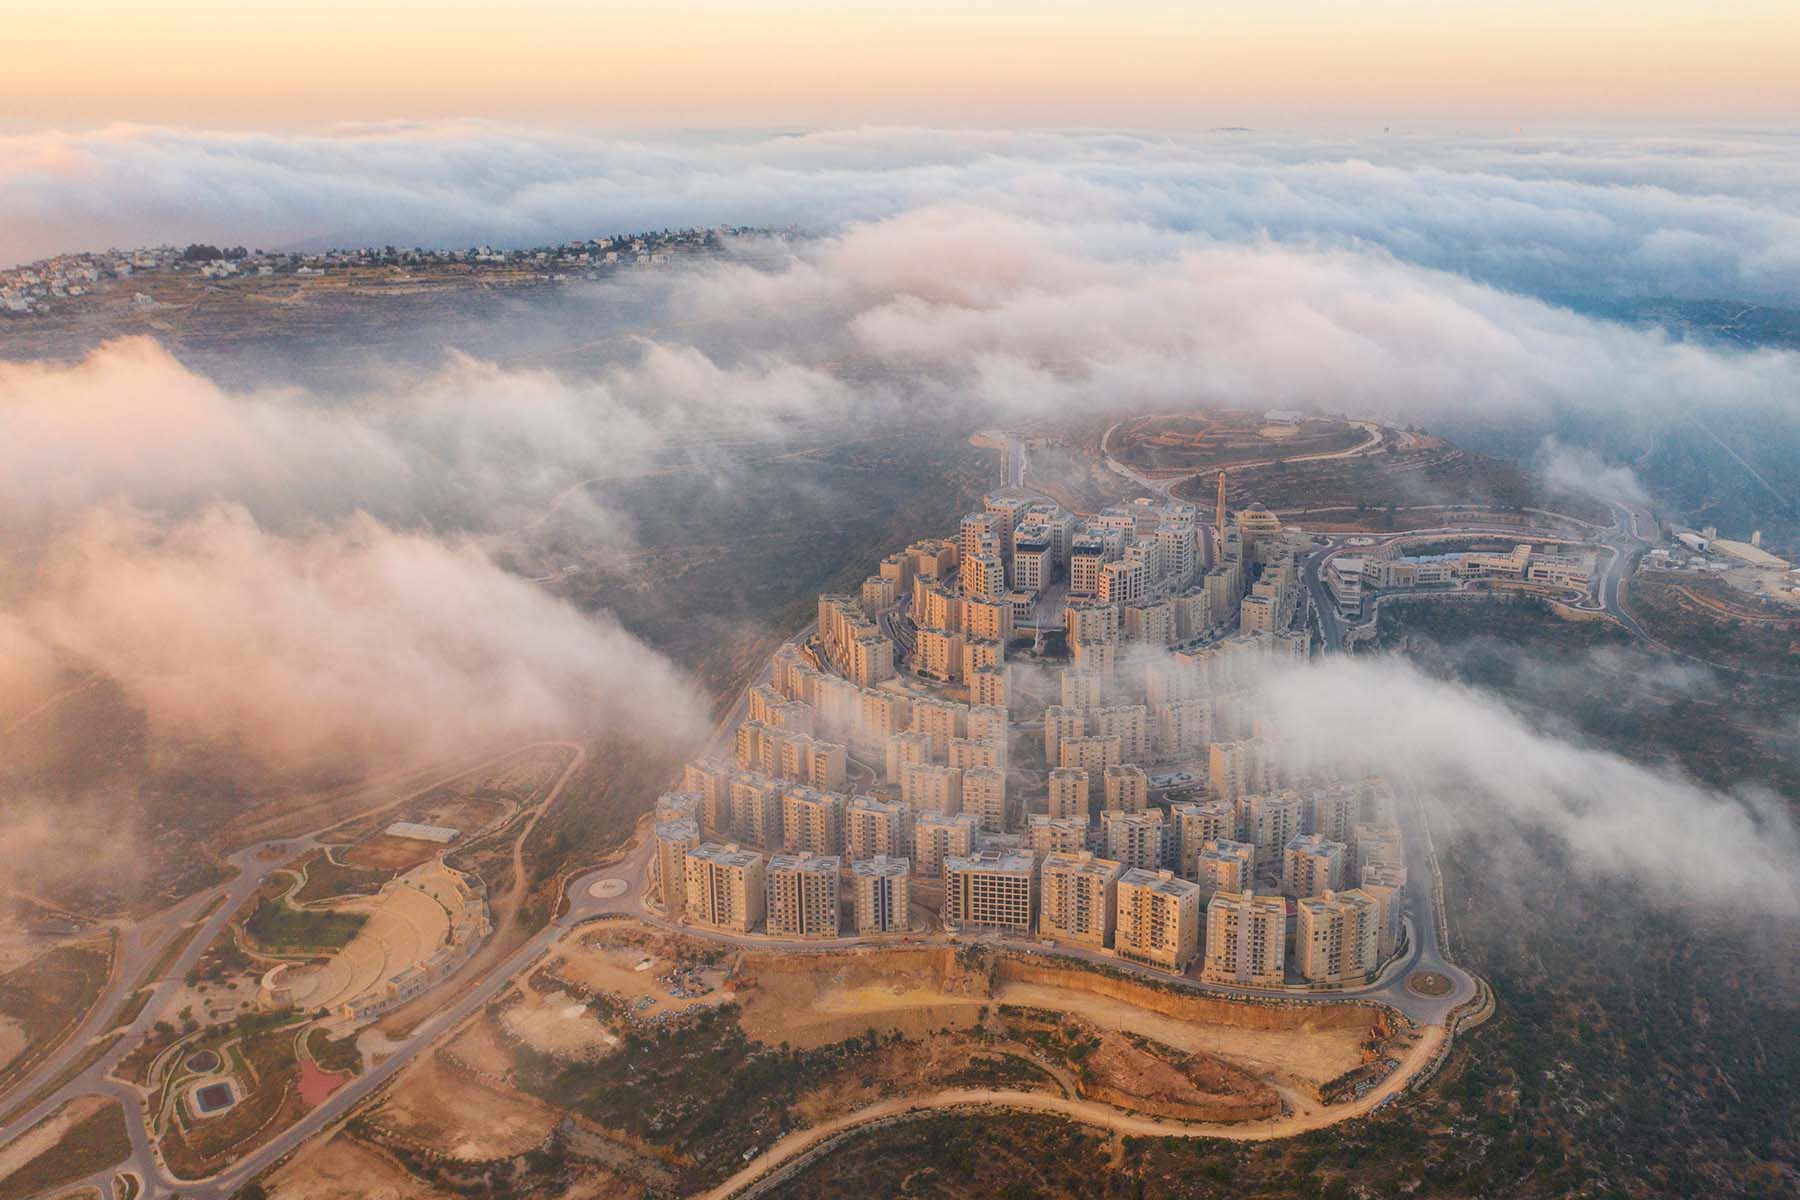 An aerial photo of the tall apartments towers of Rawabi, shrouded in clouds, in the West Bank.